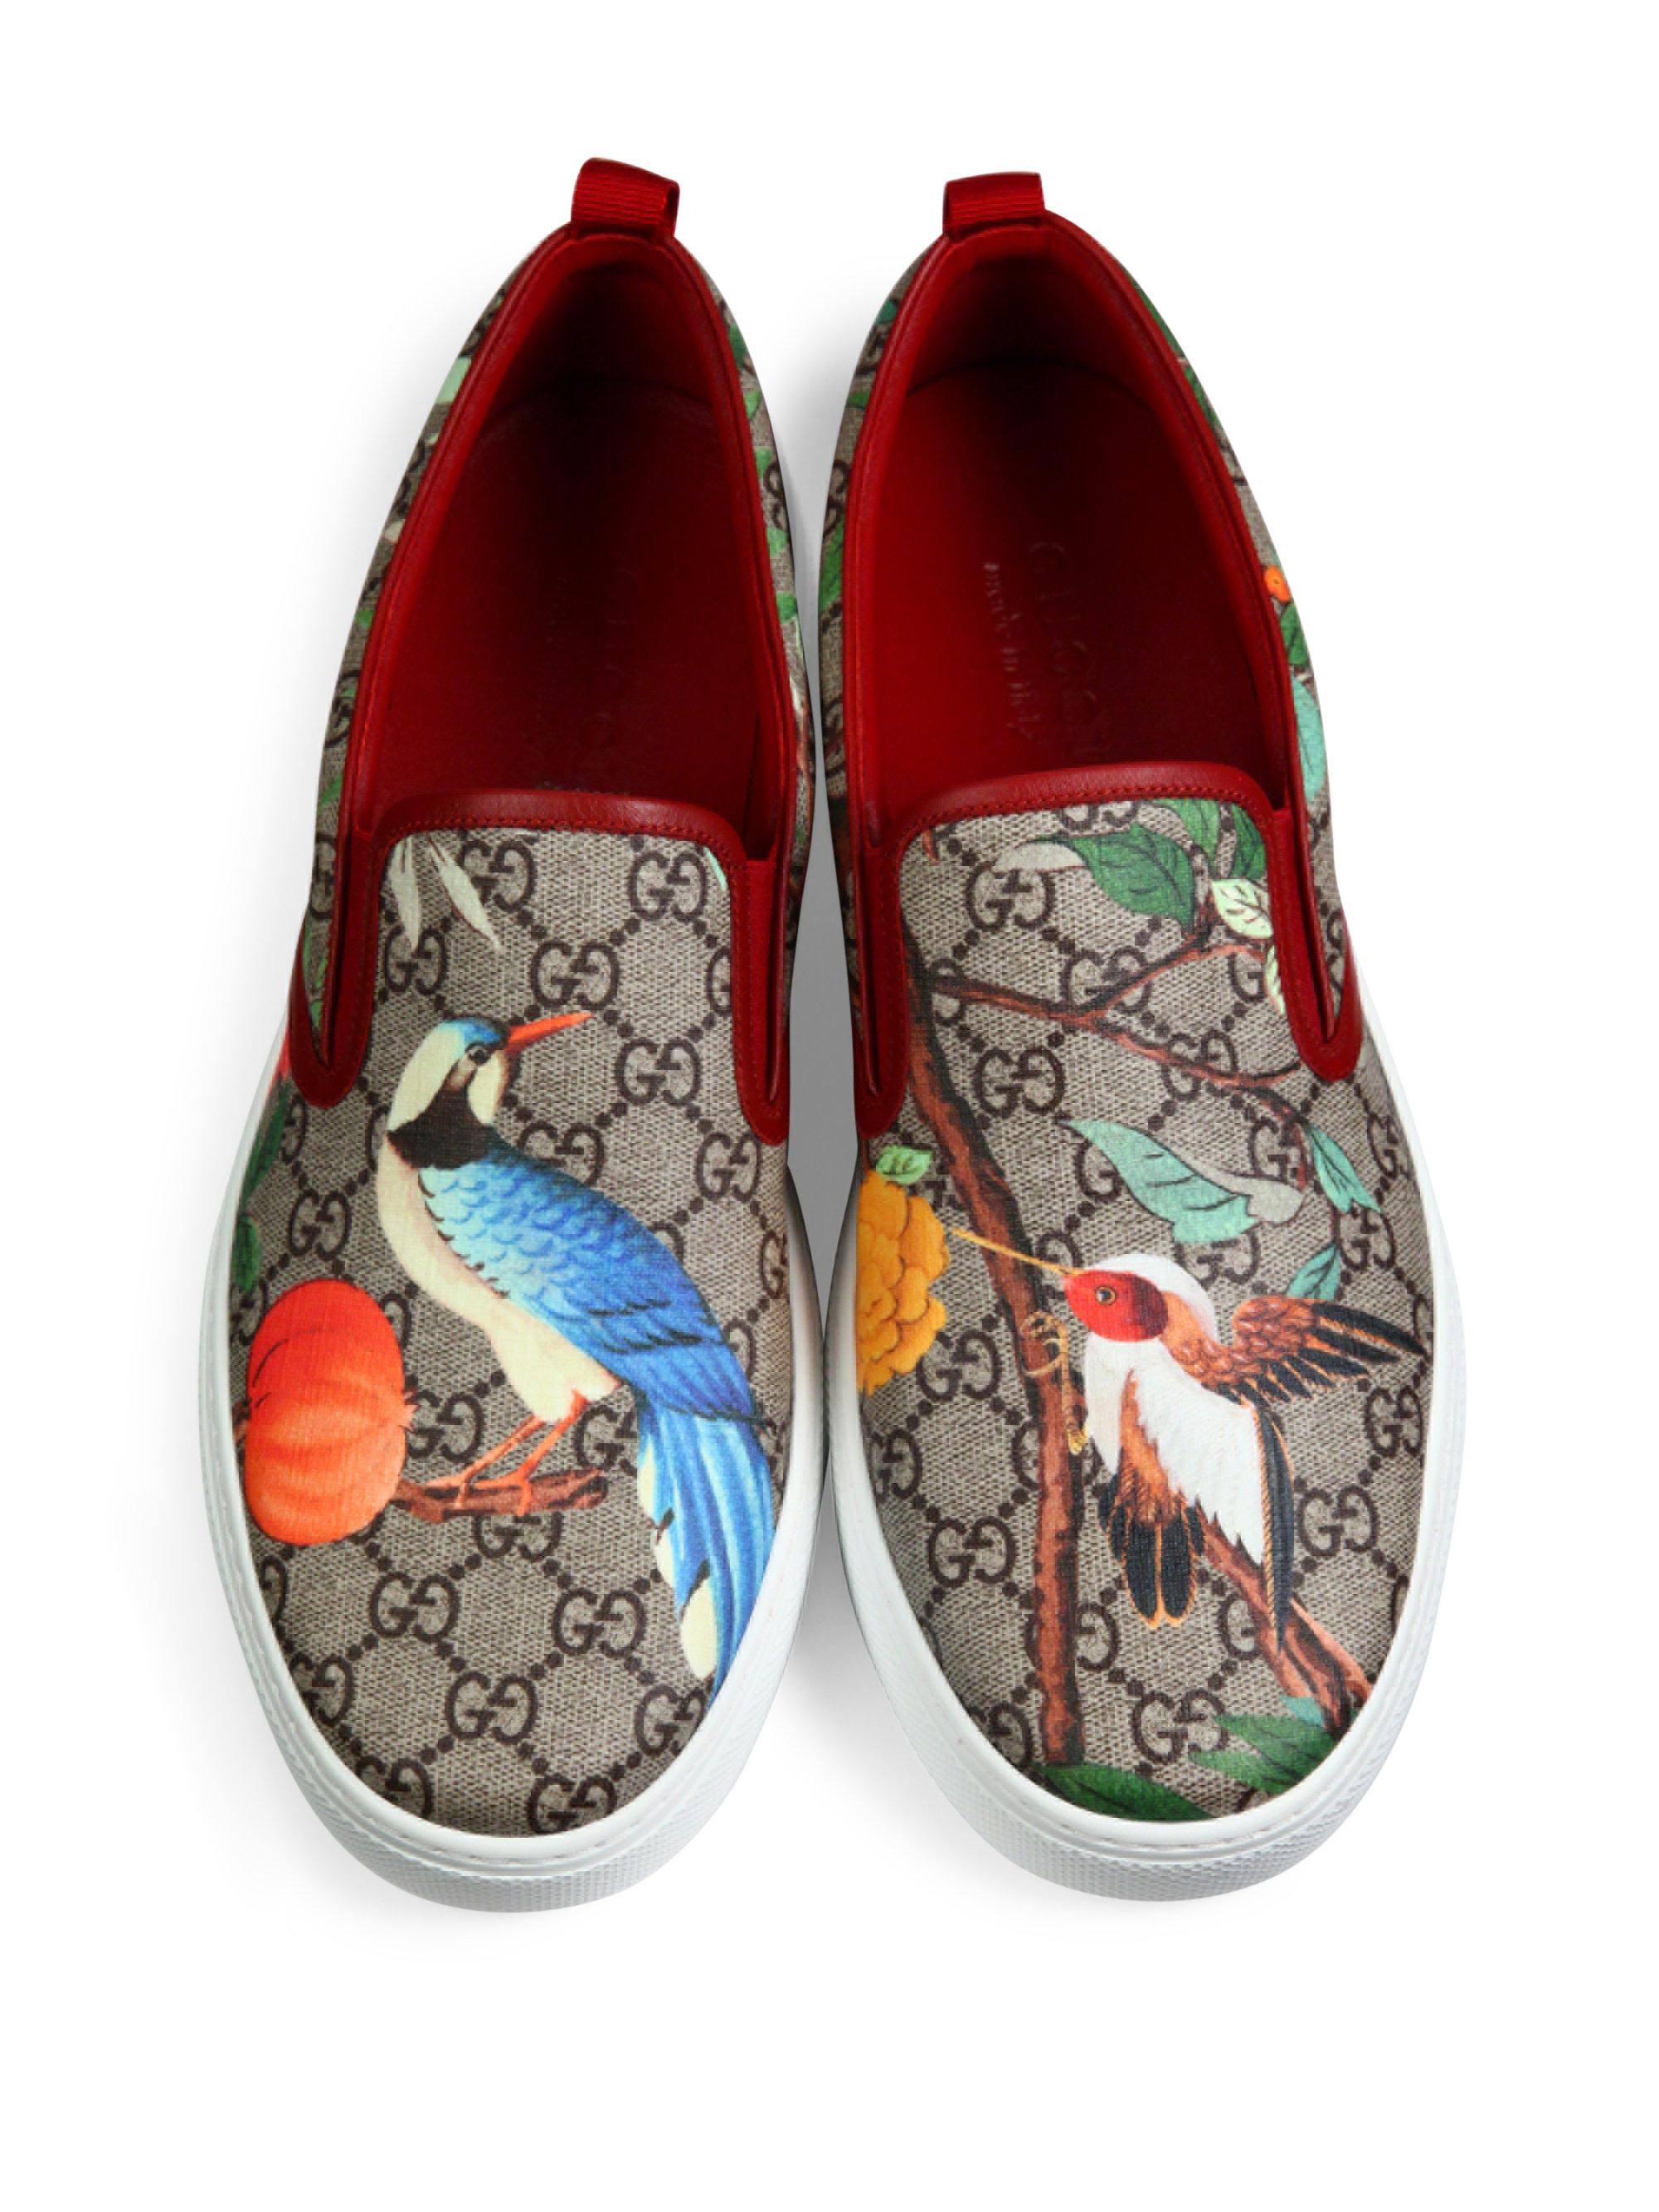 politi Electrify Udvidelse Gucci Leather Gg Supreme Tian Print Slip-on Sneakers in Gray - Lyst